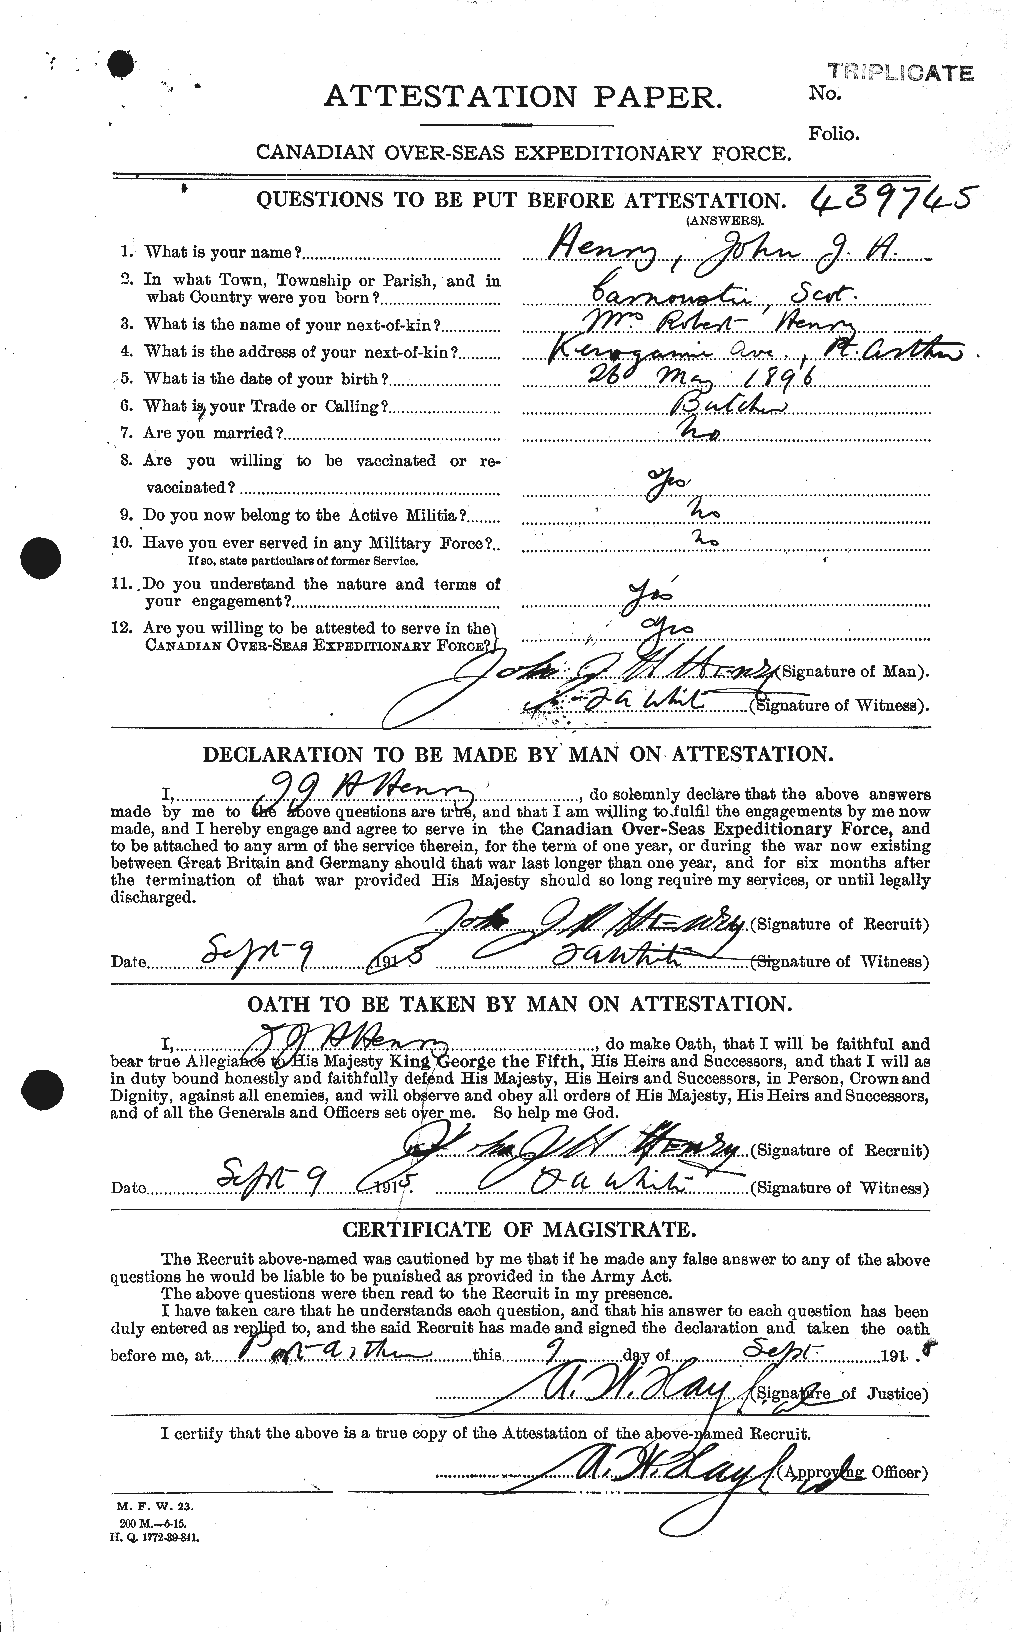 Personnel Records of the First World War - CEF 387621a